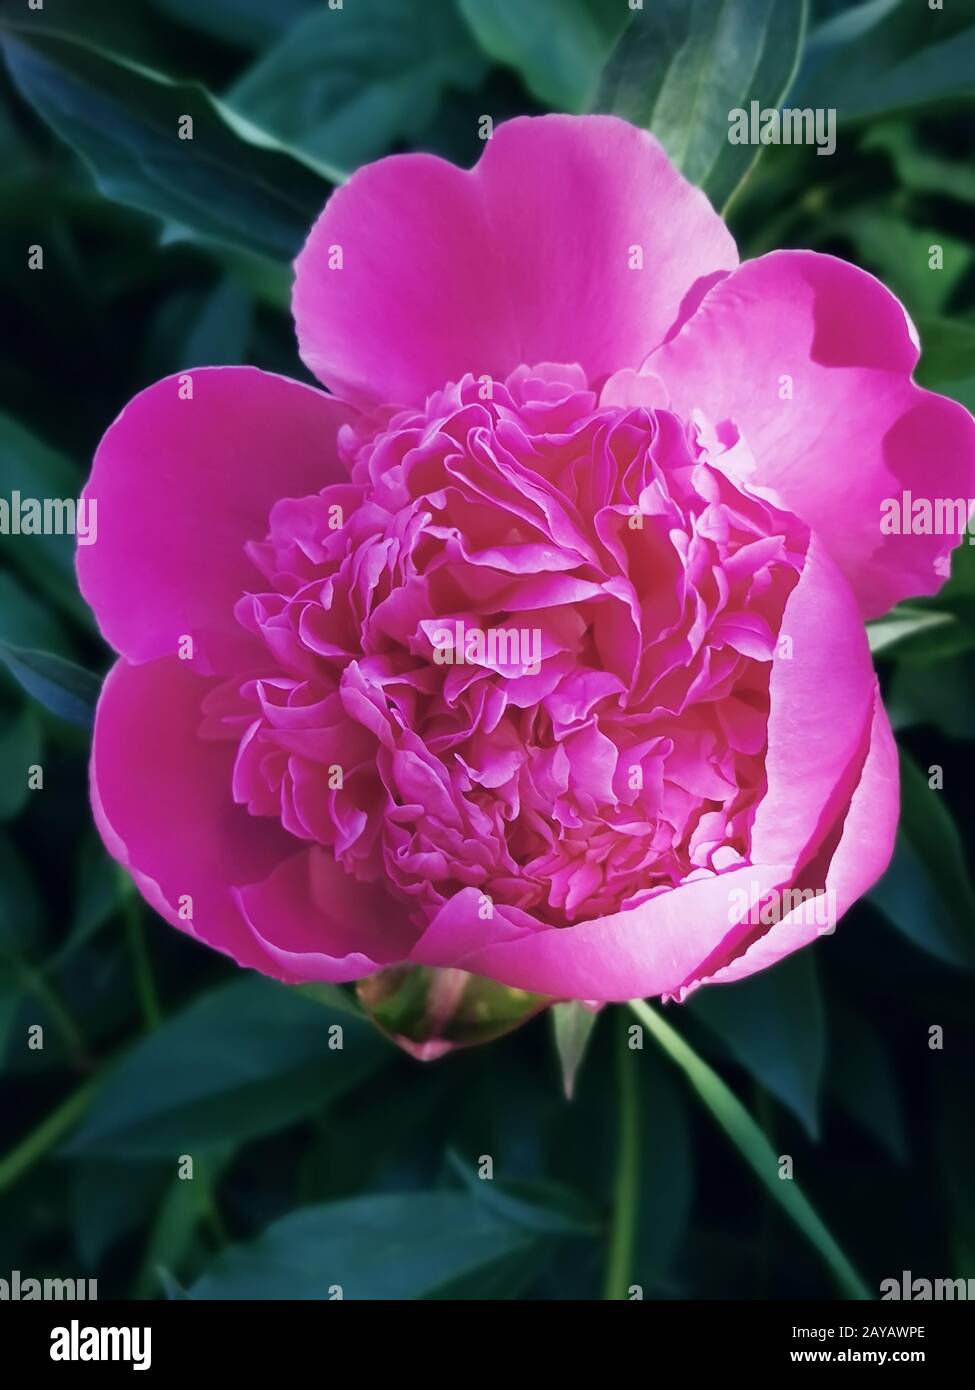 Blooming peony in the garden among green leaves Stock Photo